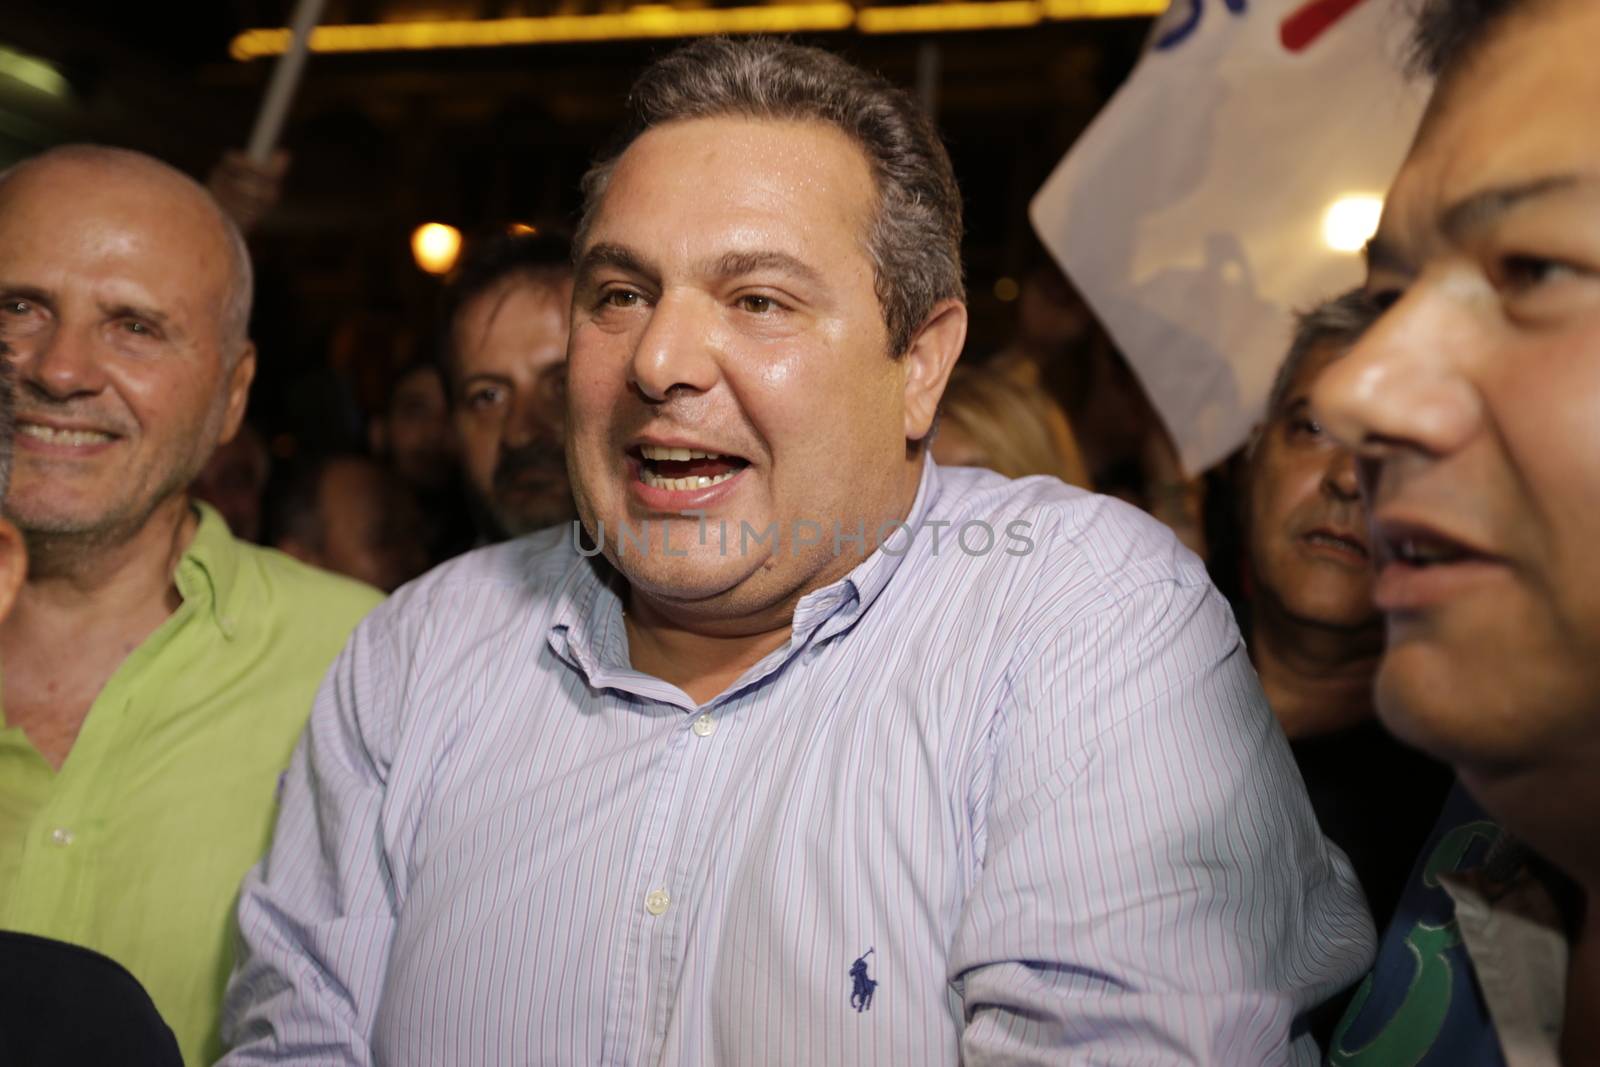 GREECE, Athens: Panos Kammenos from the Independent Greeks addressed supporters in Athens after agreeing to enter a coalition agreement with victorious Syriza after Greece's parliamentary election on September 20, 2015.